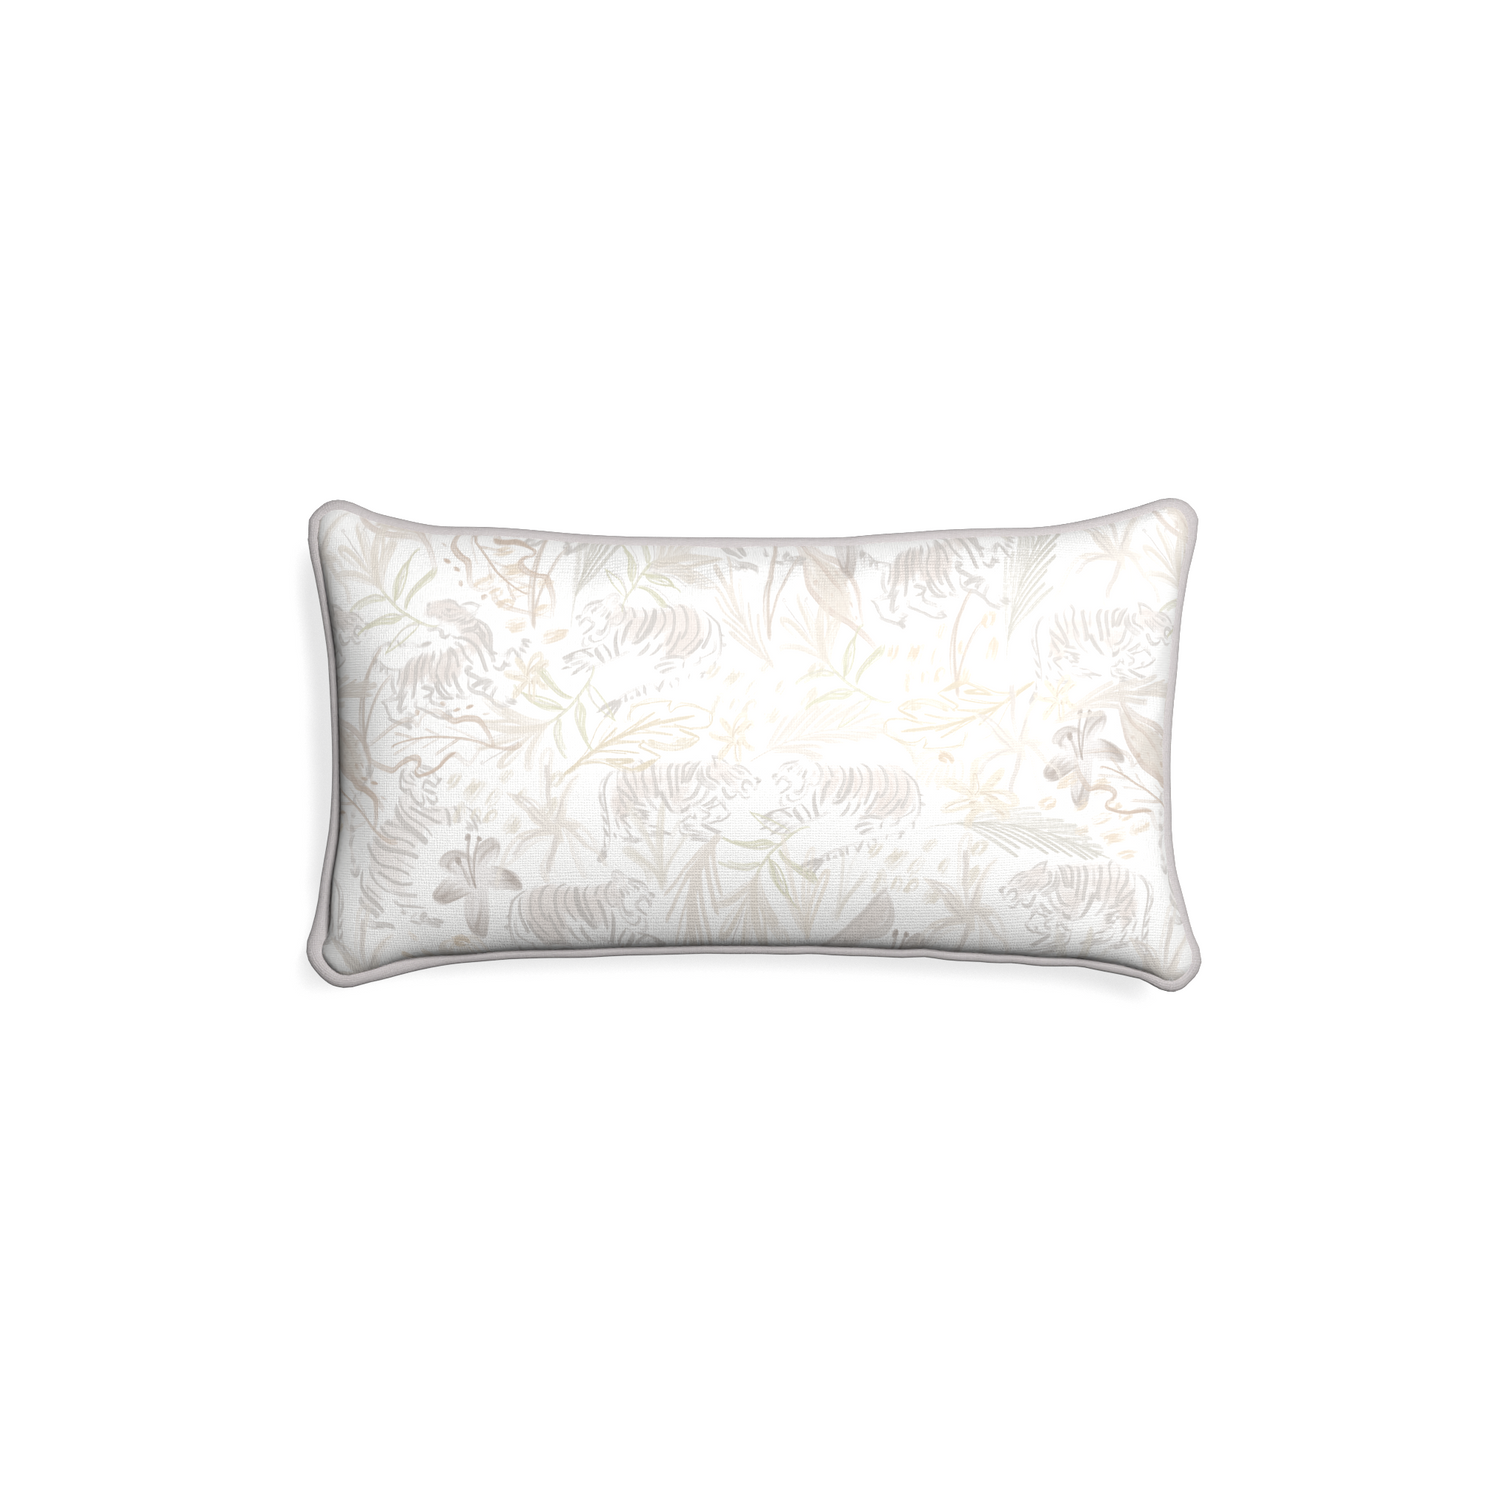 Petite-lumbar frida sand custom beige chinoiserie tigerpillow with pebble piping on white background